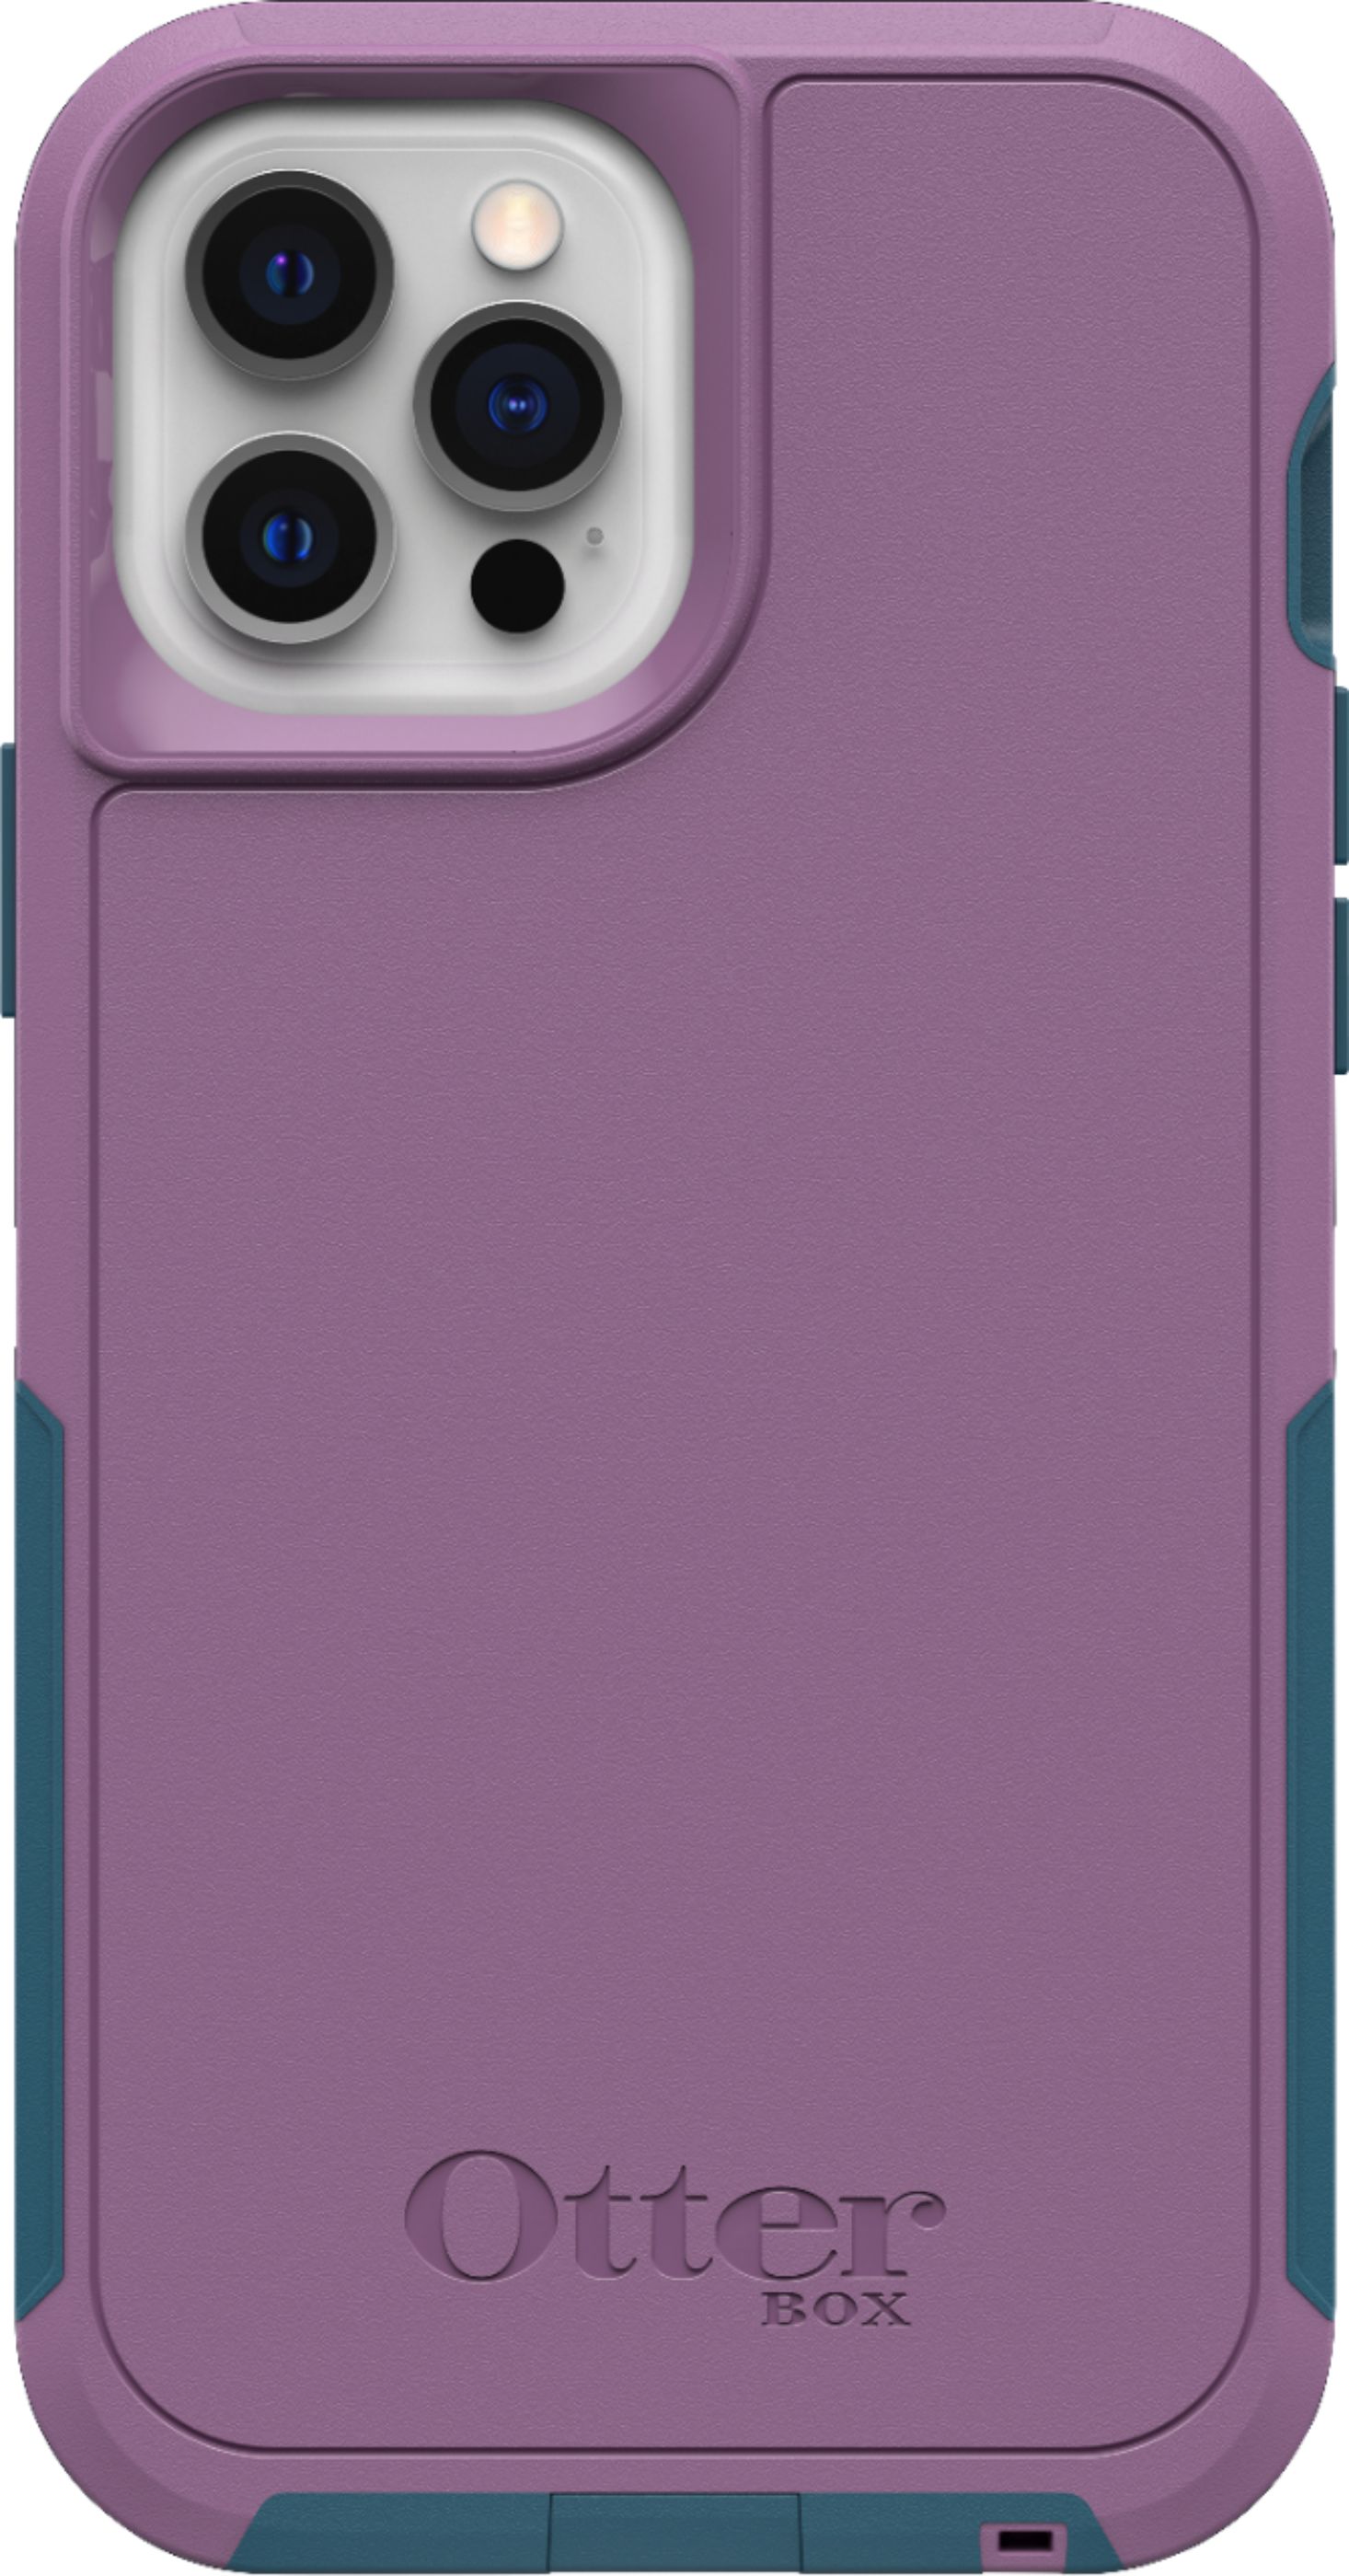 Otterbox Defender Series Pro Xt For Apple Iphone 12 Pro Max Lavender Bliss 77 393 Best Buy